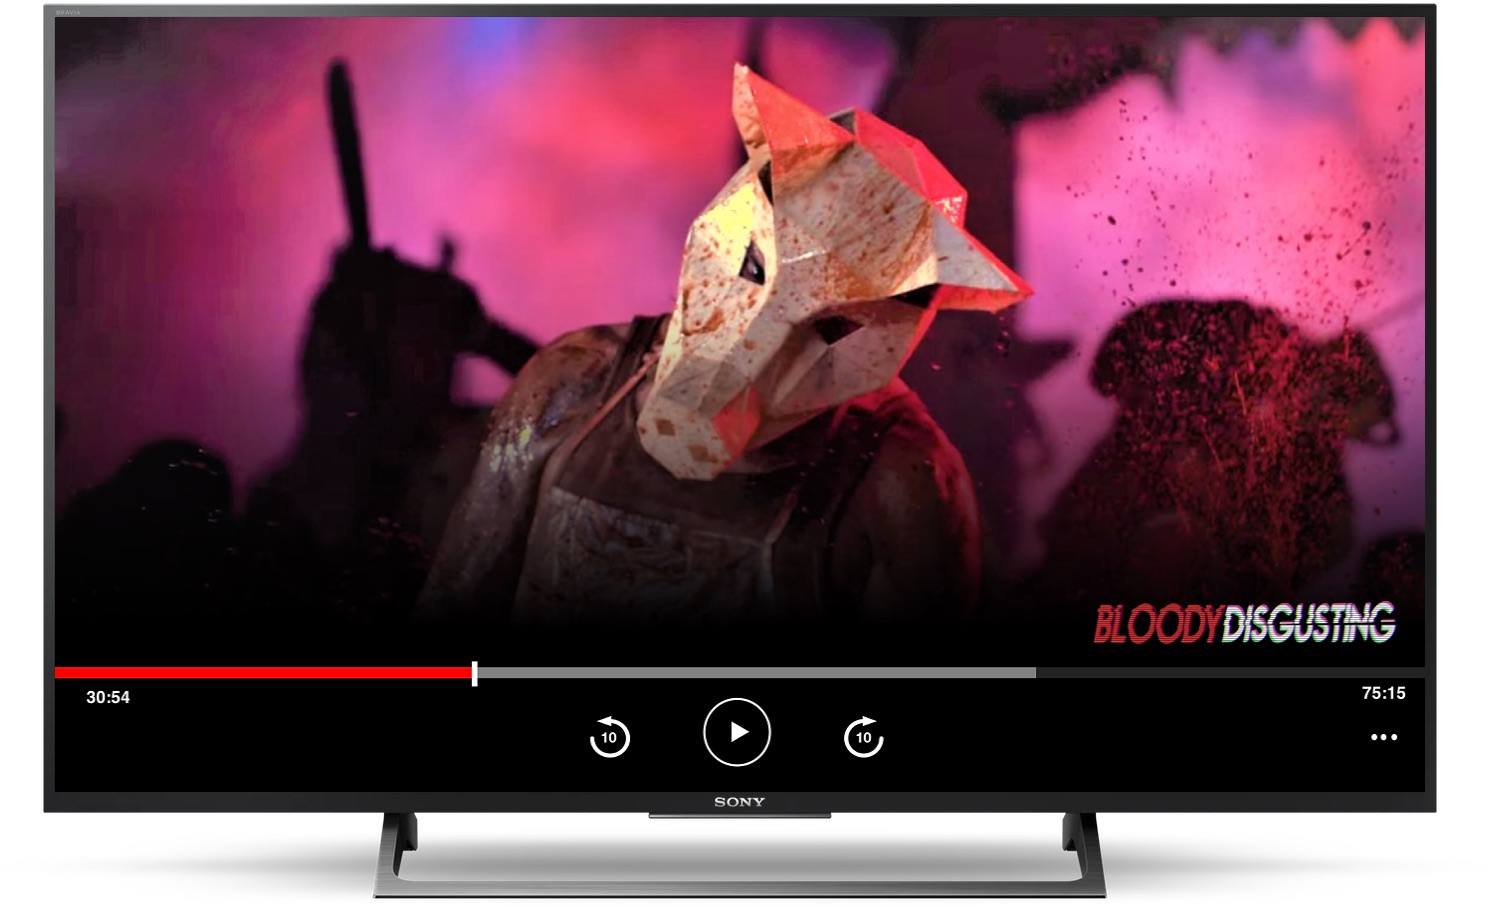 Bloody Disgusting Channel Will Launch Exclusively on The Roku Channel